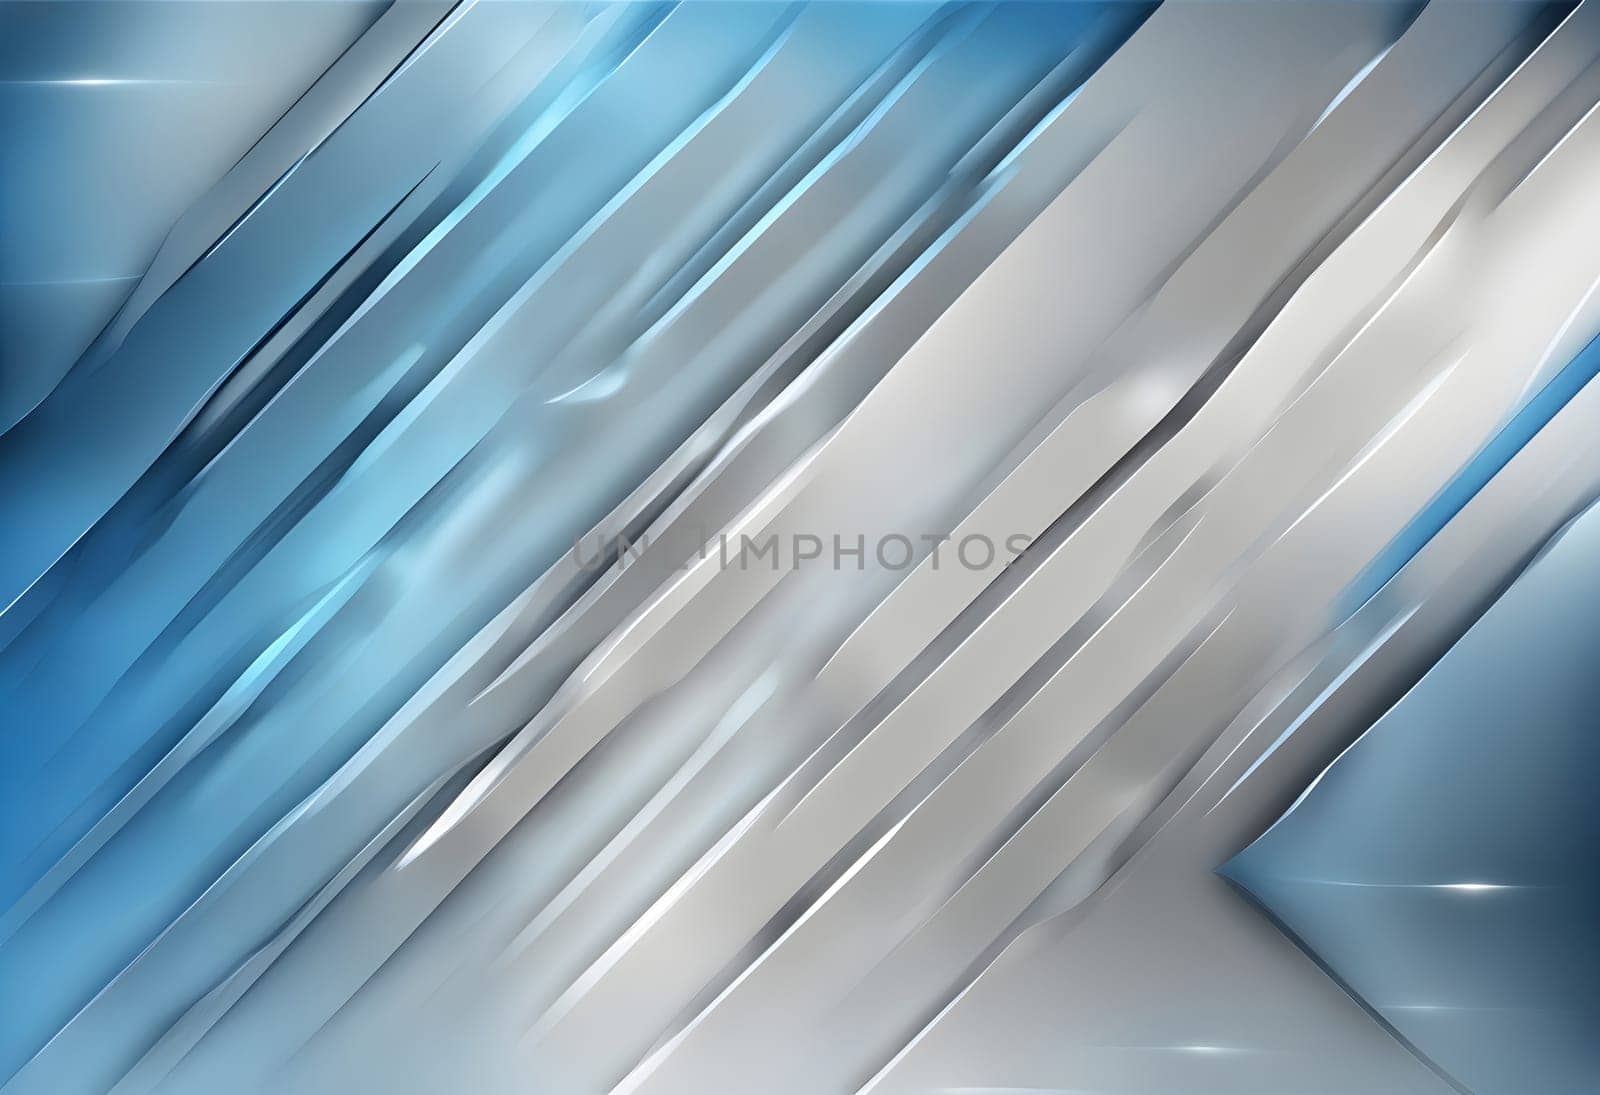 Technology background realistic background colors for product or anode purposes in shades of blue by rostik924